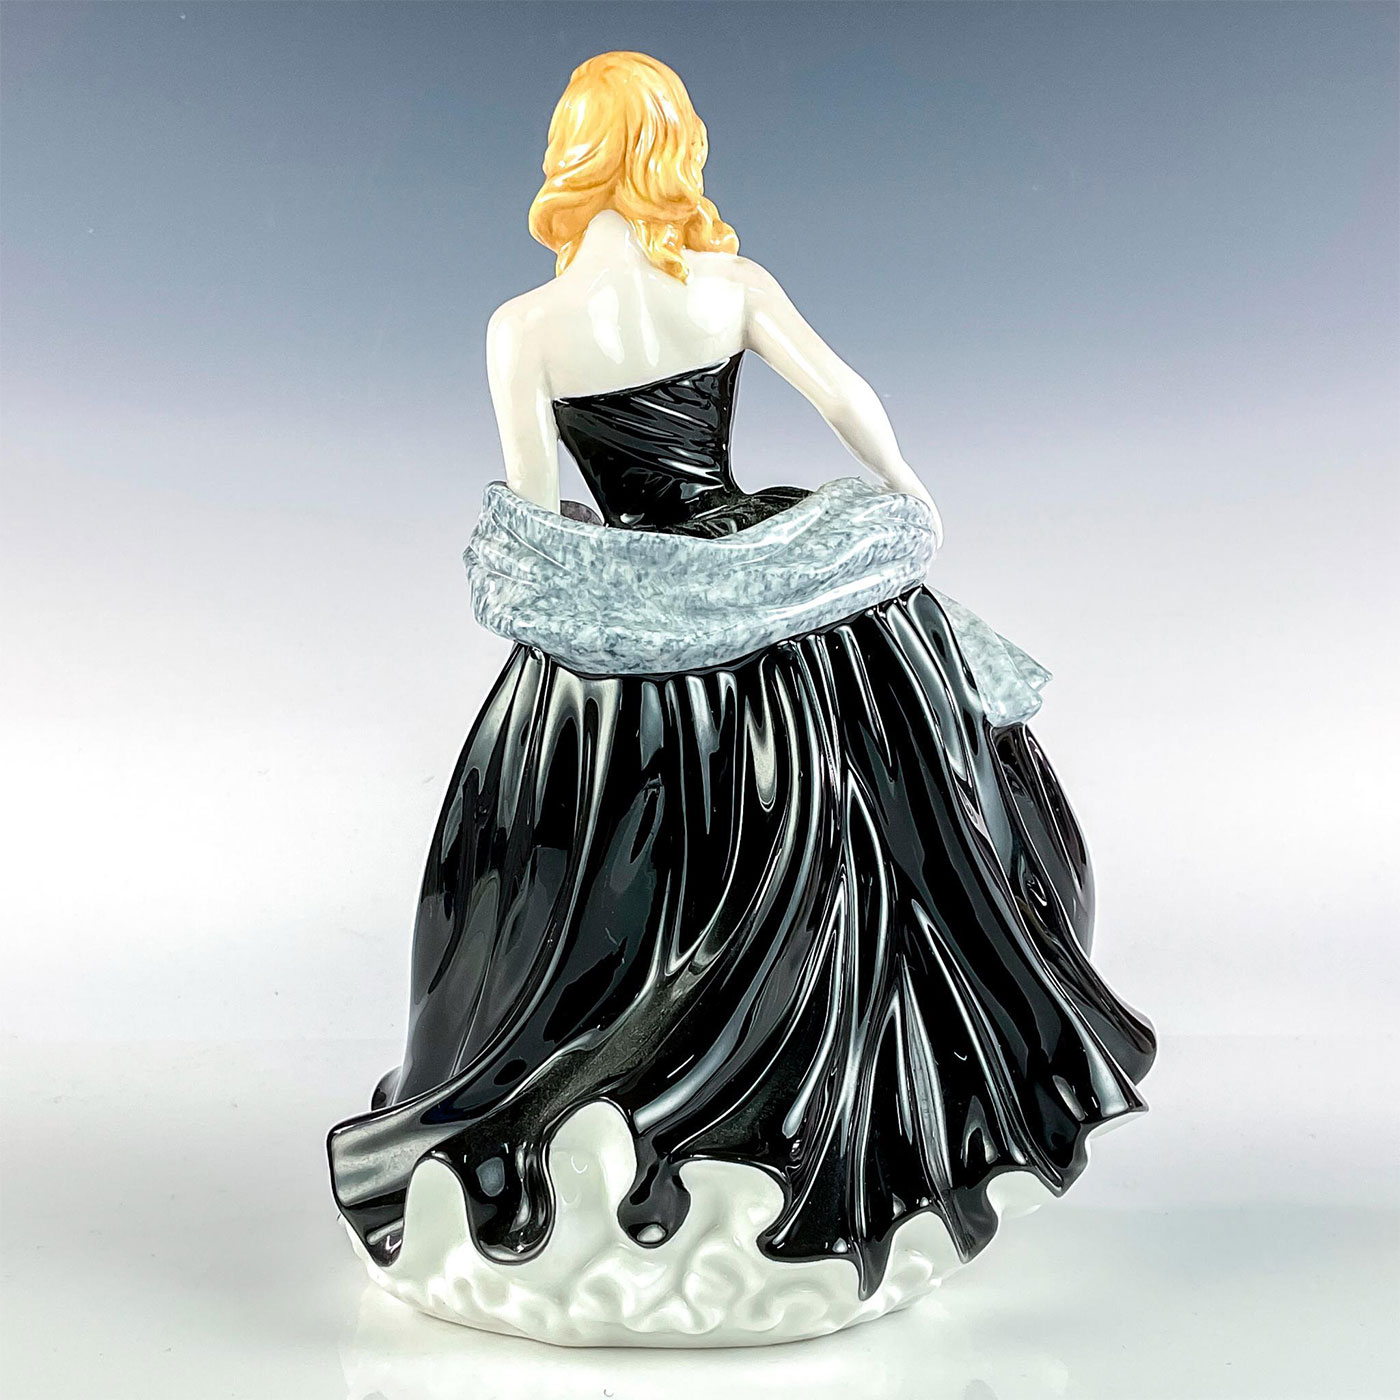 Special Wishes HN4749 - Royal Doulton Figurine, COA - Image 3 of 4